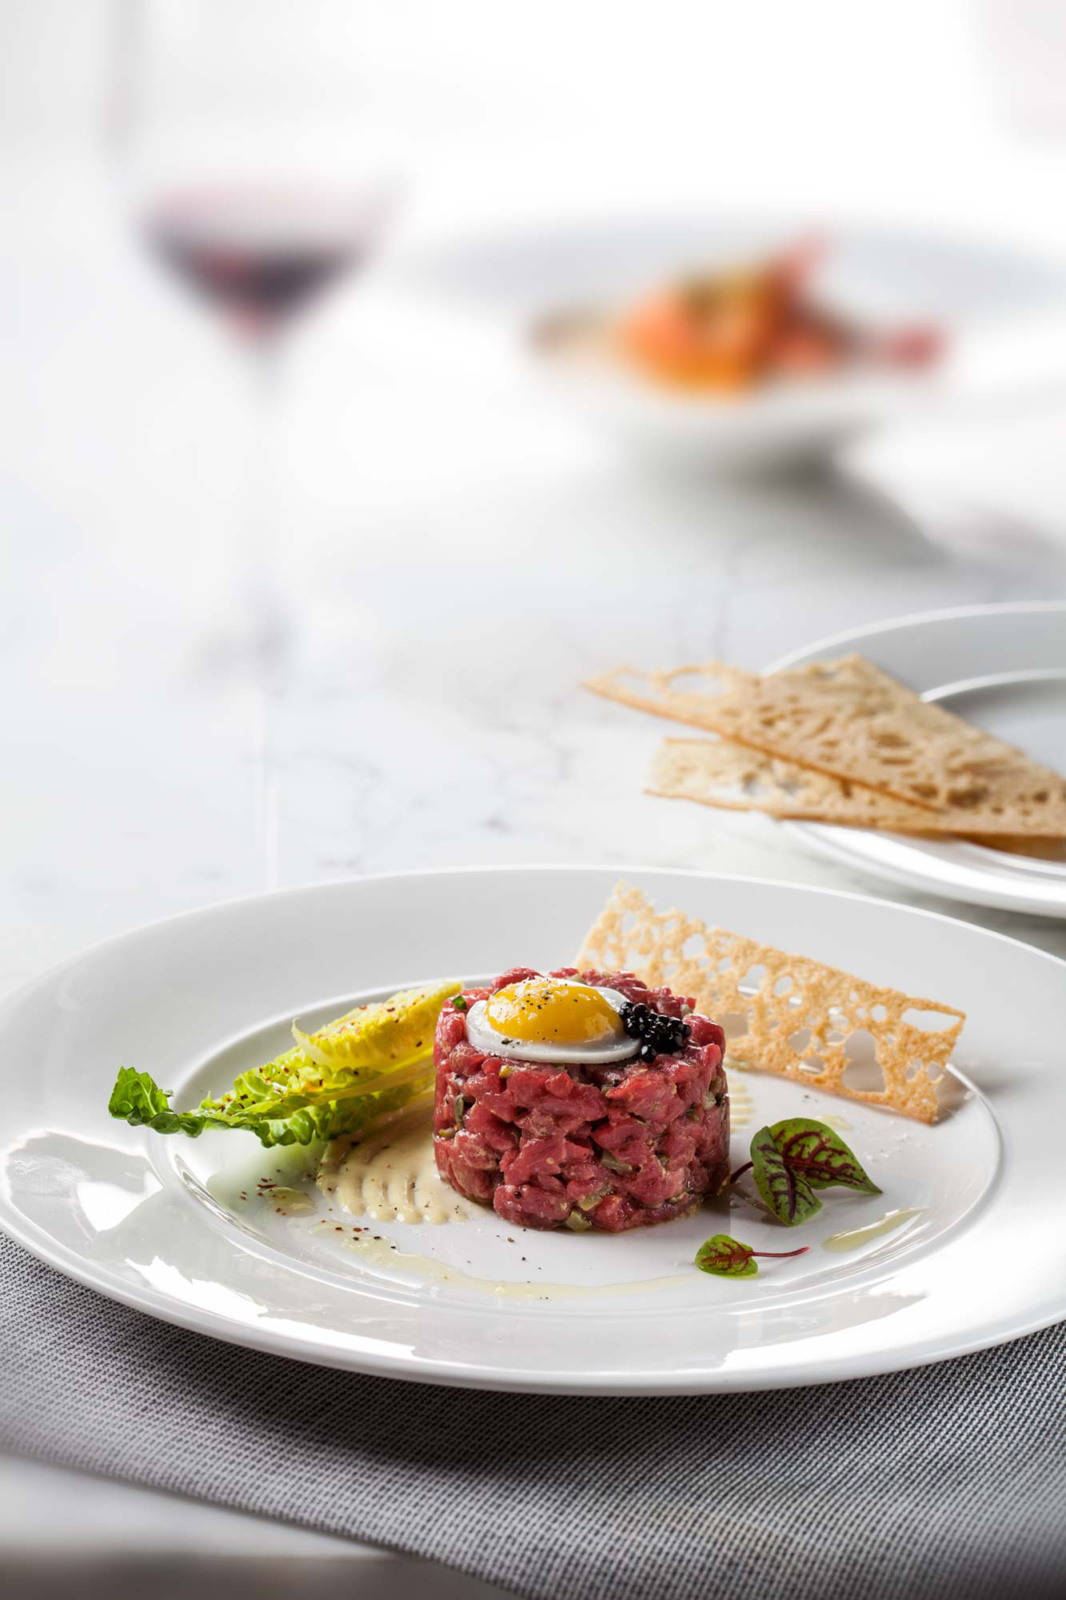 Food photography of beef tartare, art directed by Nesnadny and Schwartz for the Cru Uncorked identity